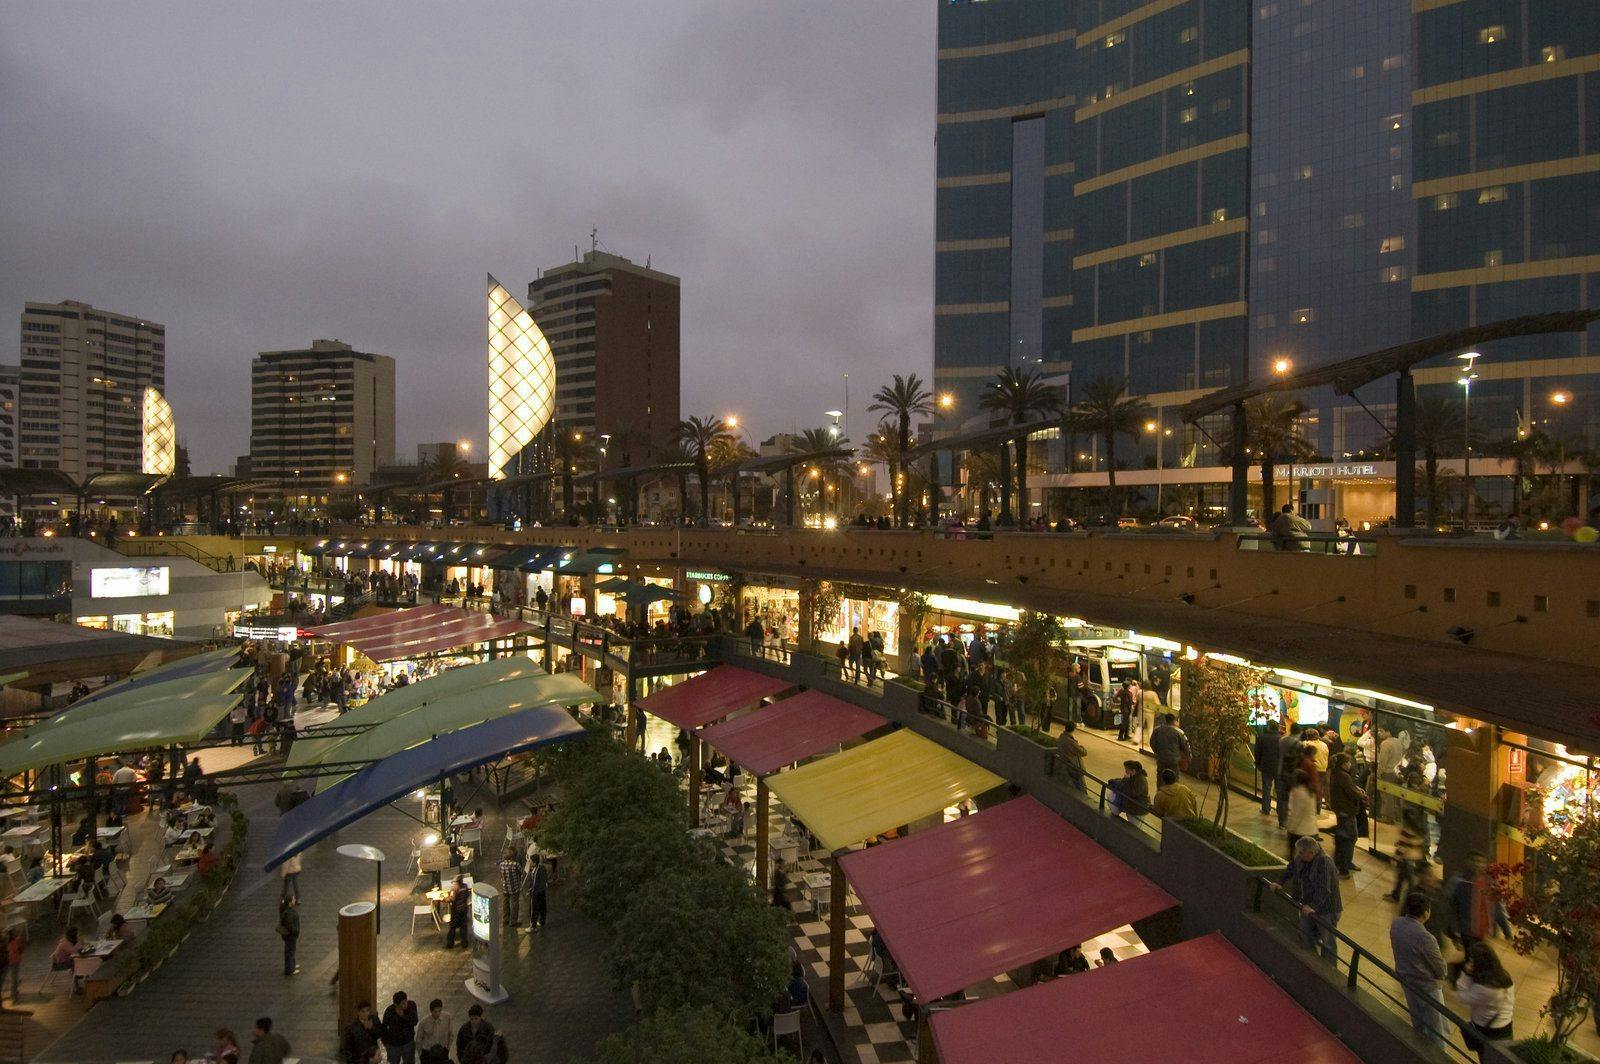 Bustling city market with crowds of people shopping and strolling.